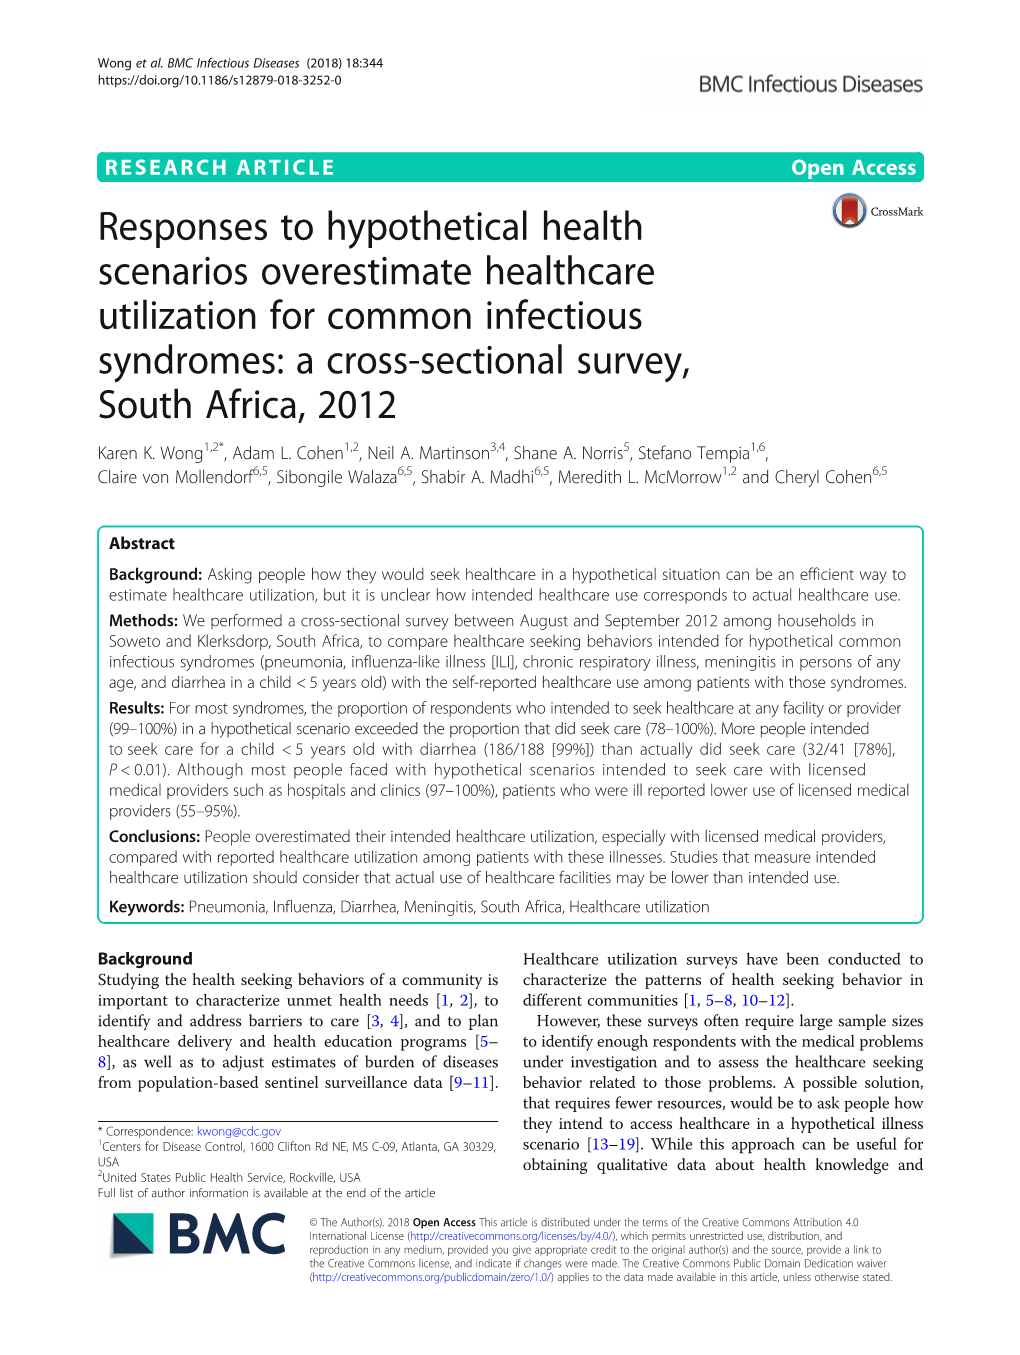 Responses to Hypothetical Health Scenarios Overestimate Healthcare Utilization for Common Infectious Syndromes: a Cross-Sectional Survey, South Africa, 2012 Karen K